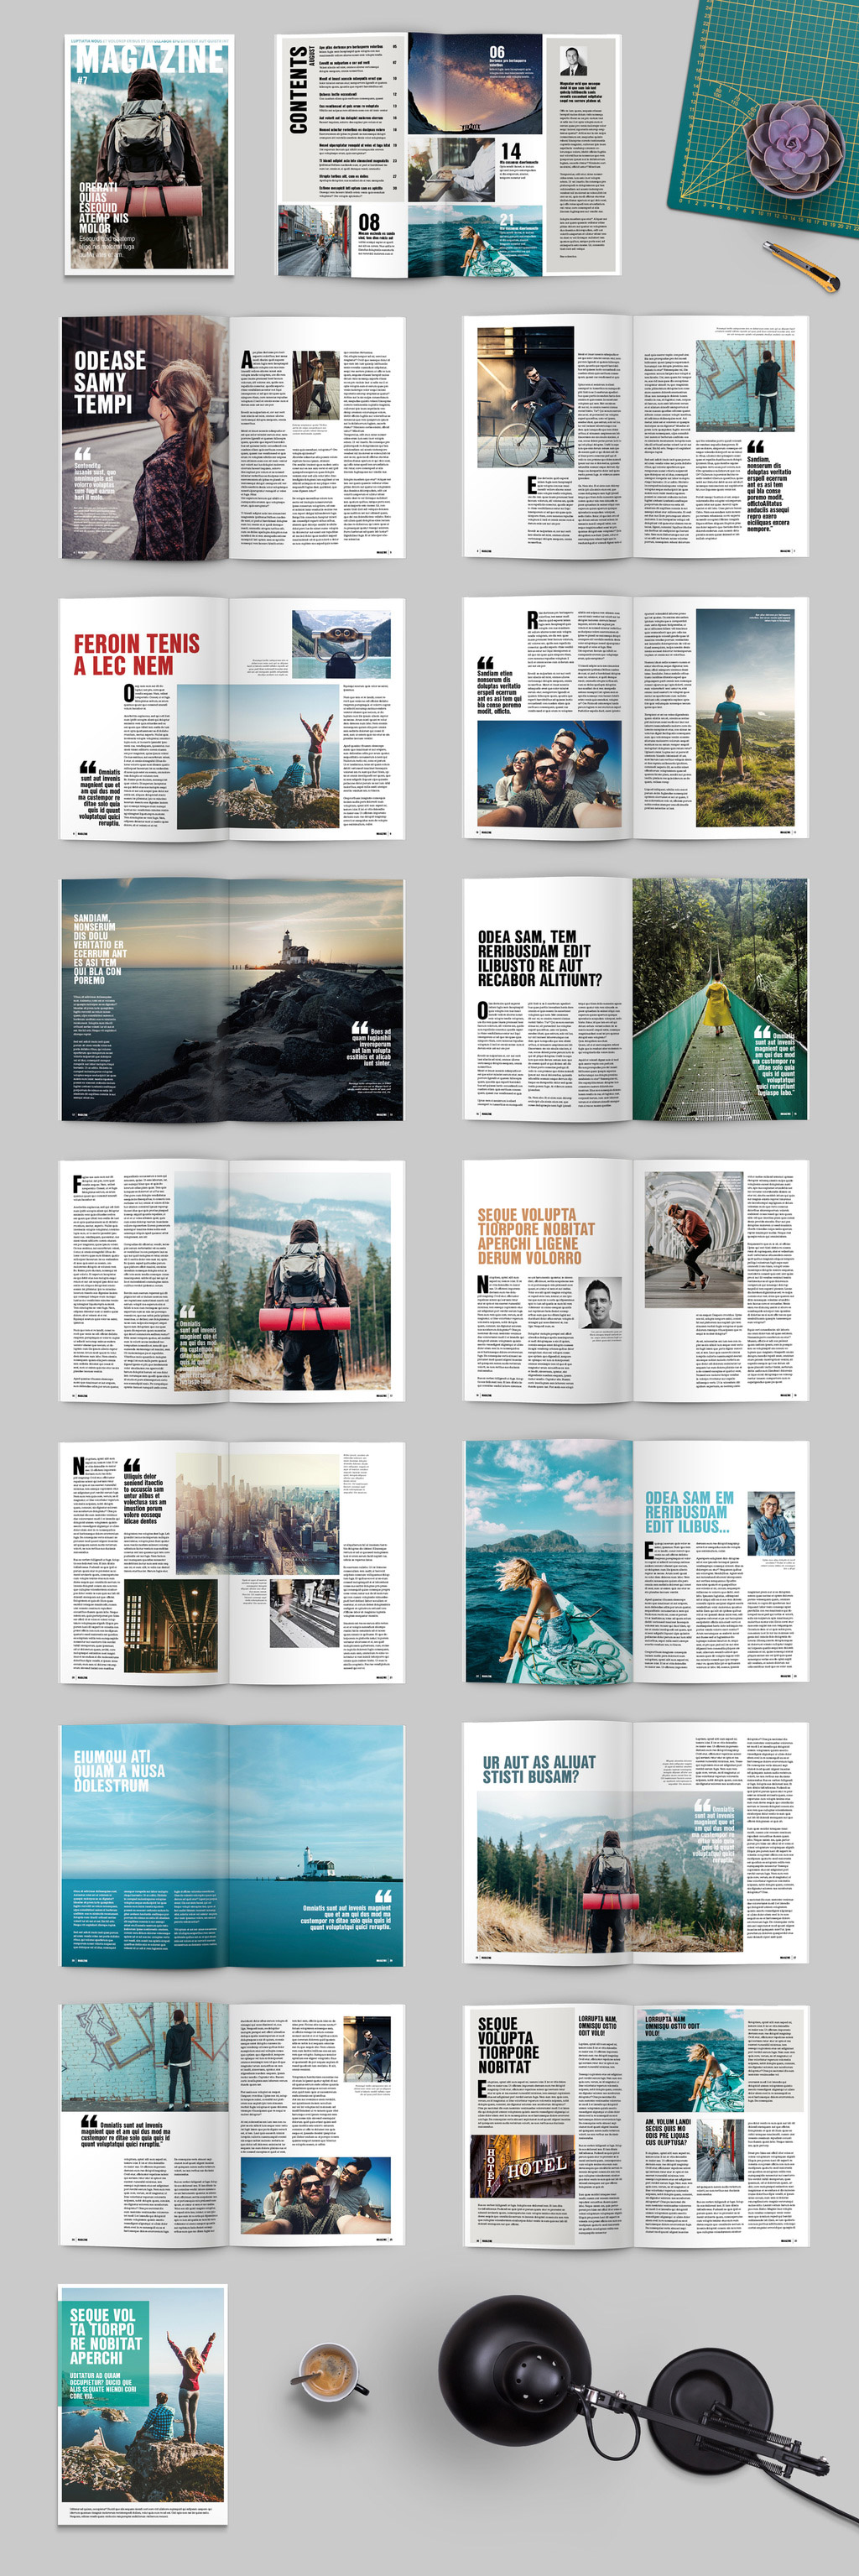 A4 InDesign magazine template with 32 pages.